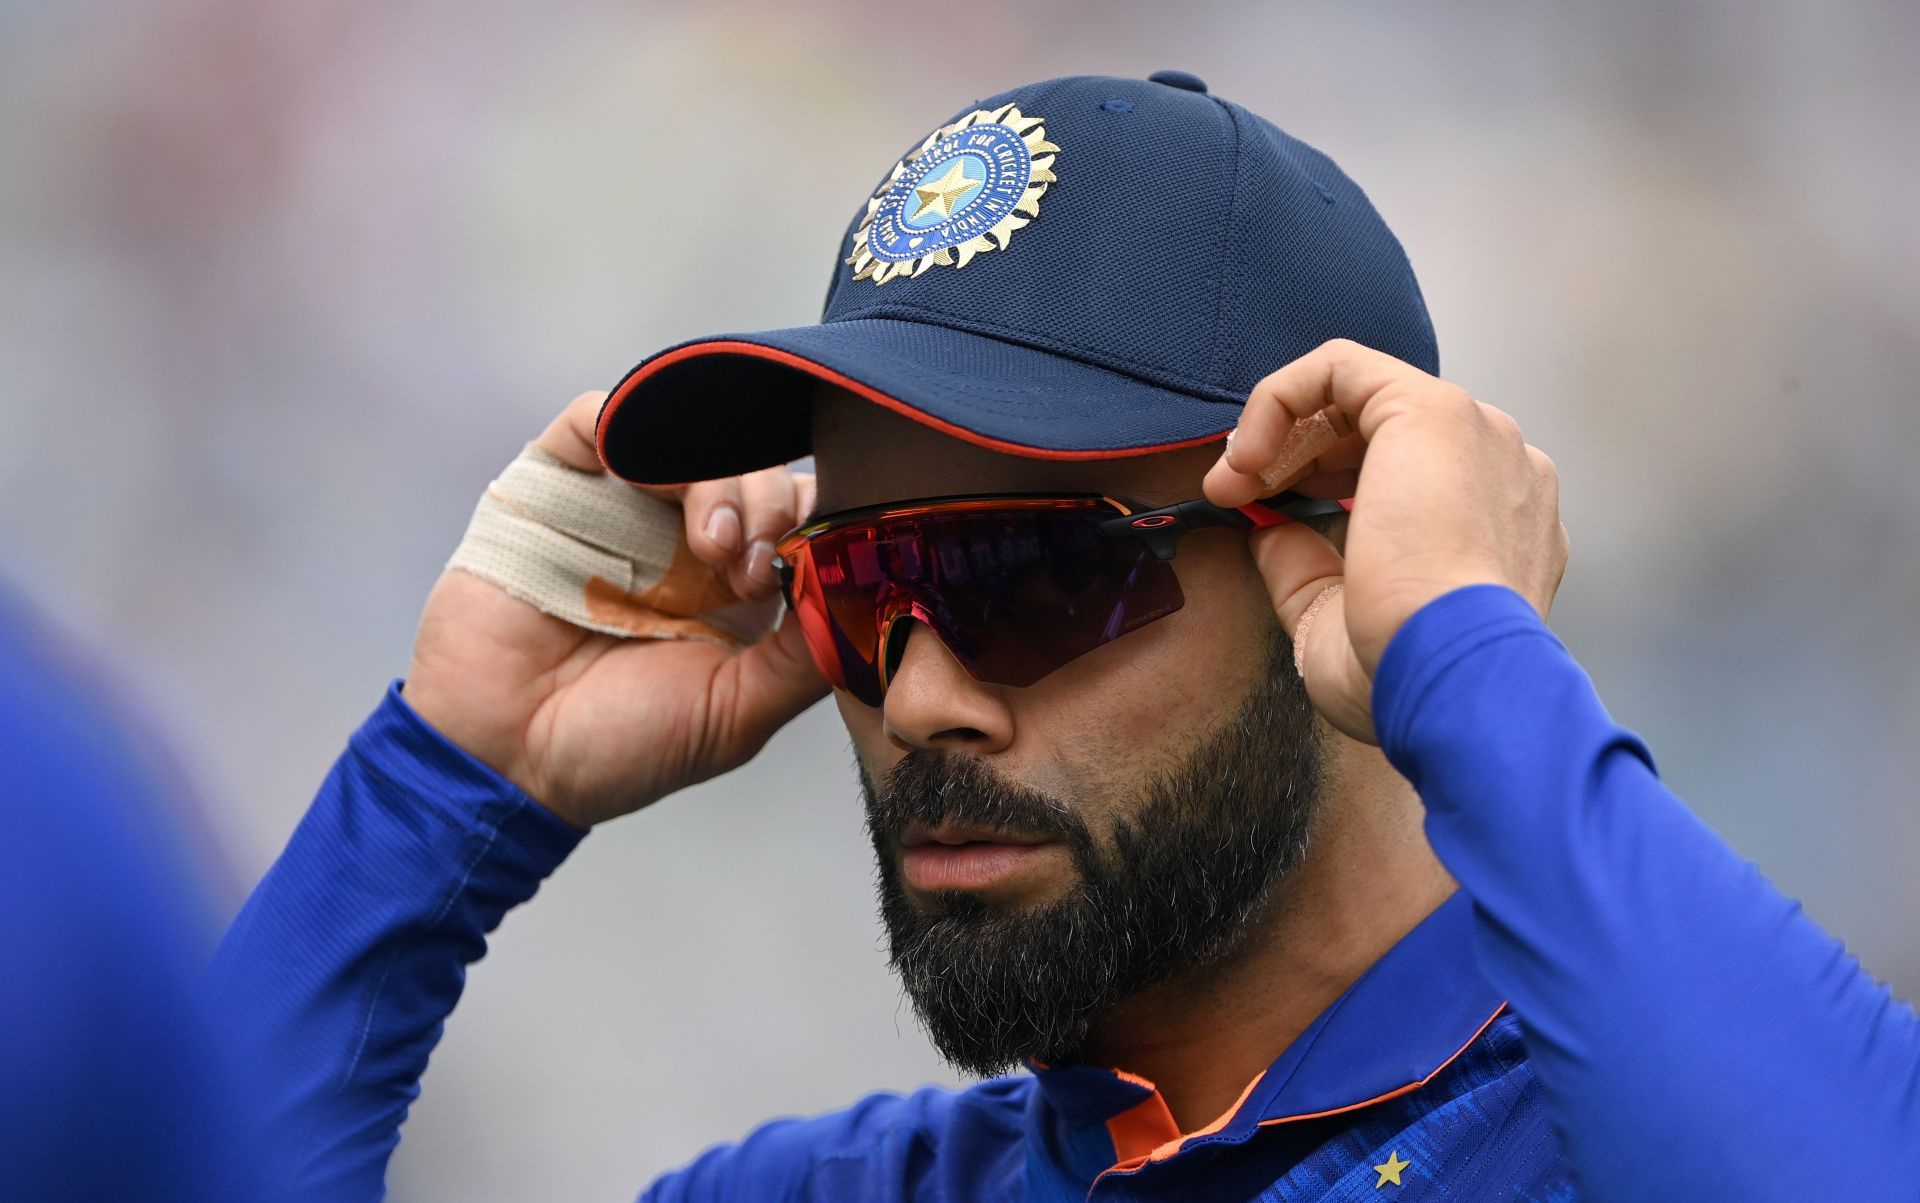 Virat Kohli has been rested following the tour of England